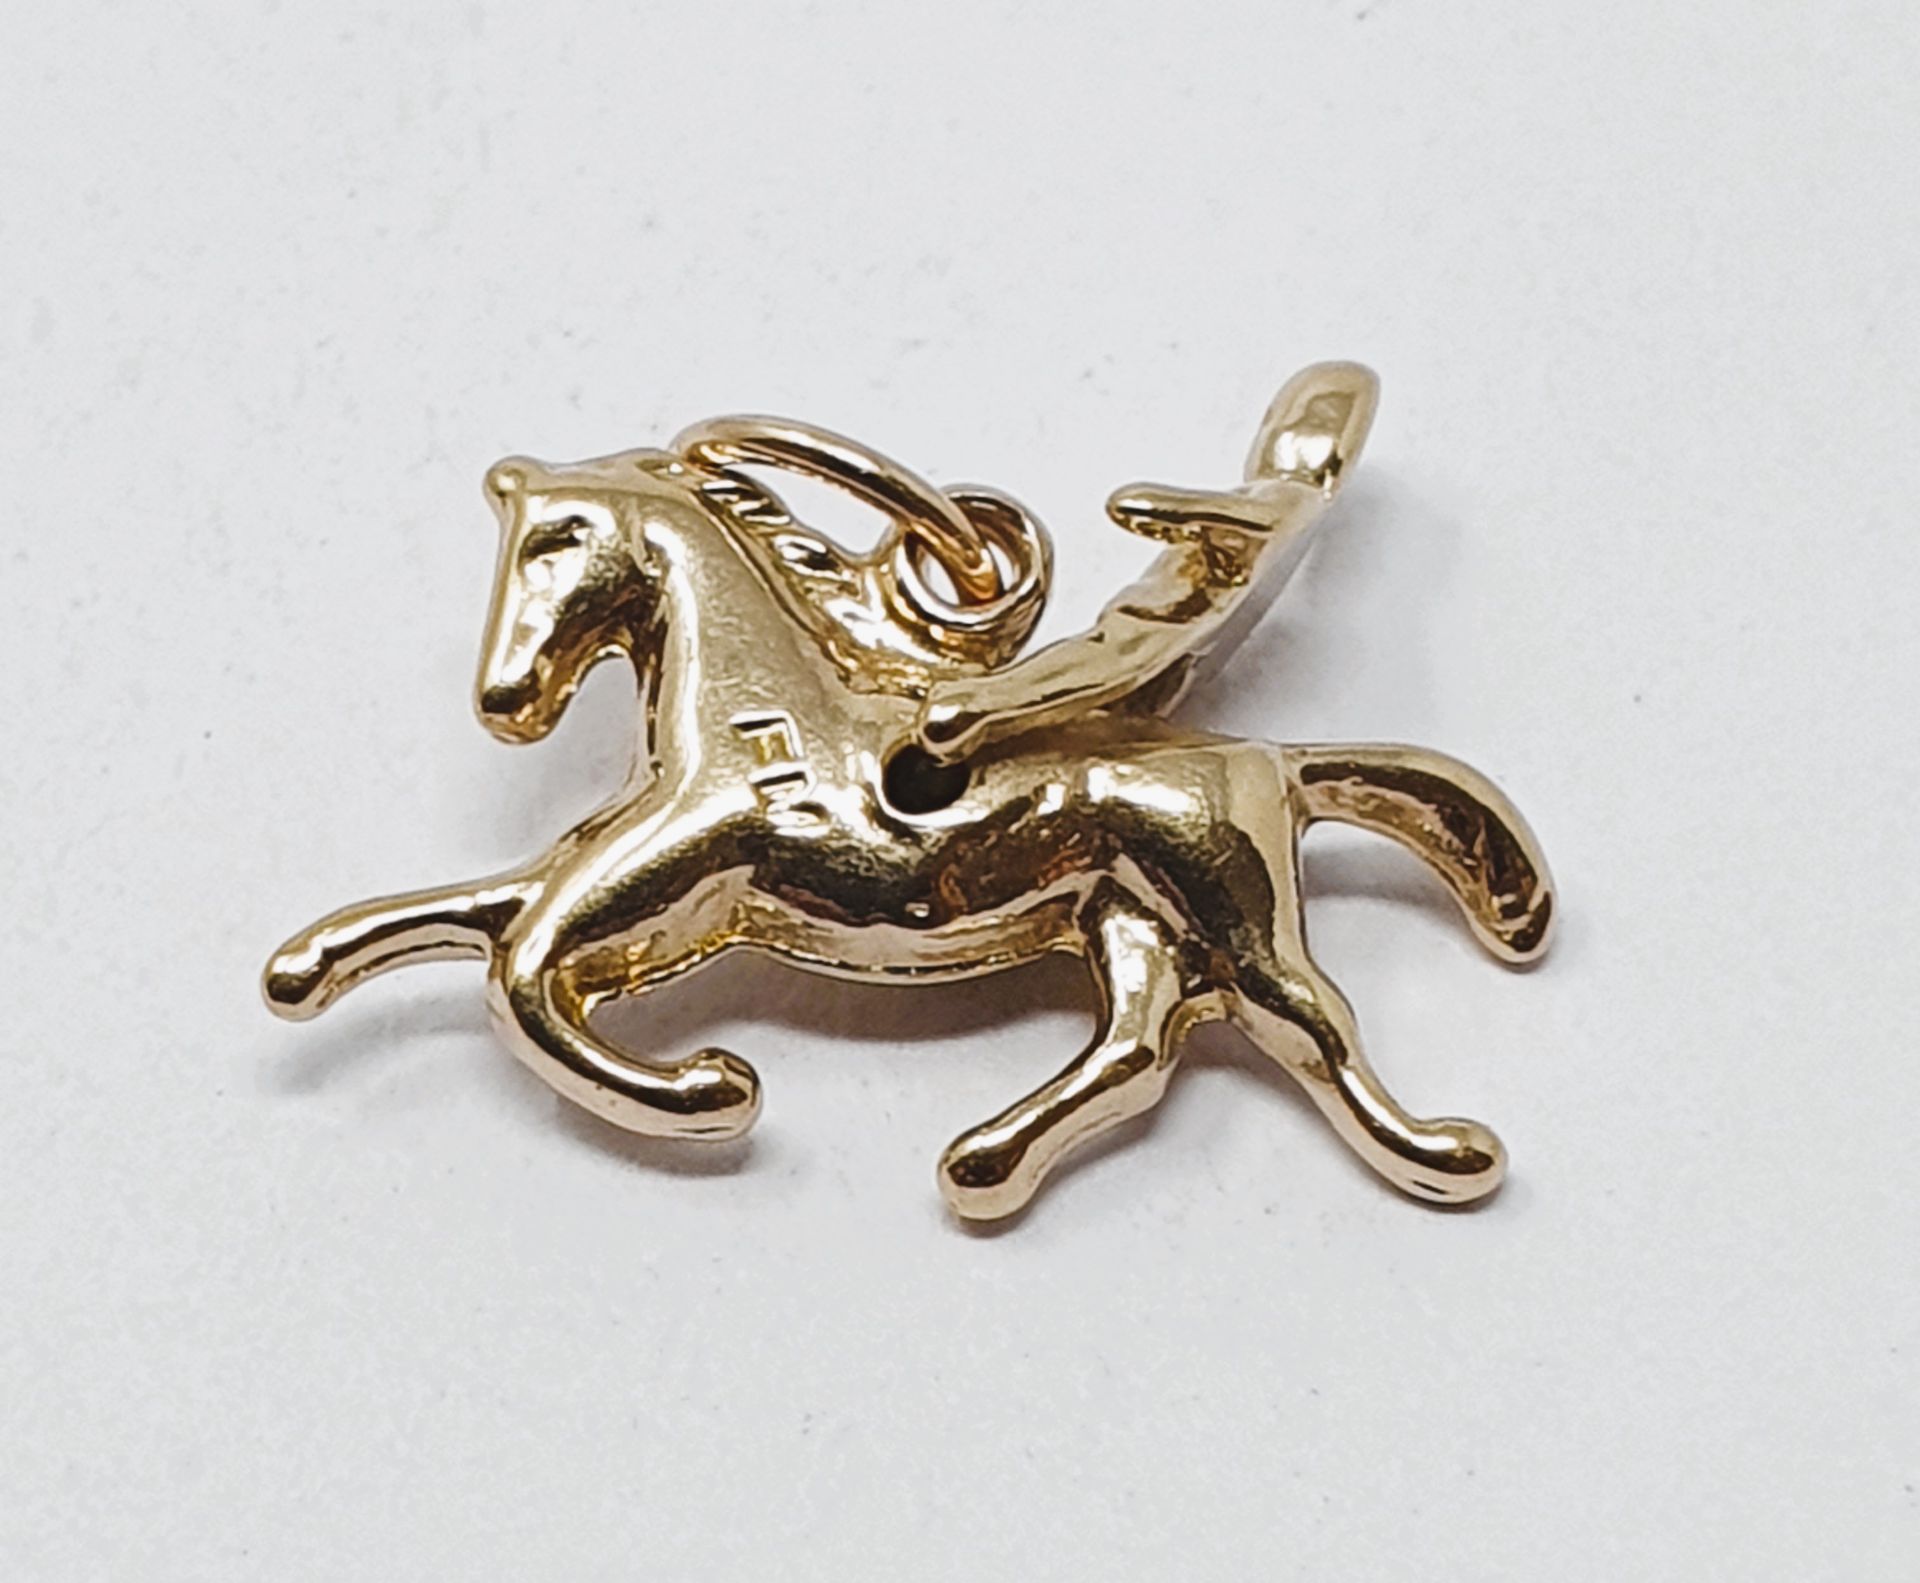 9ct gold vintage galloping horse with rider charm, gross weight 2.